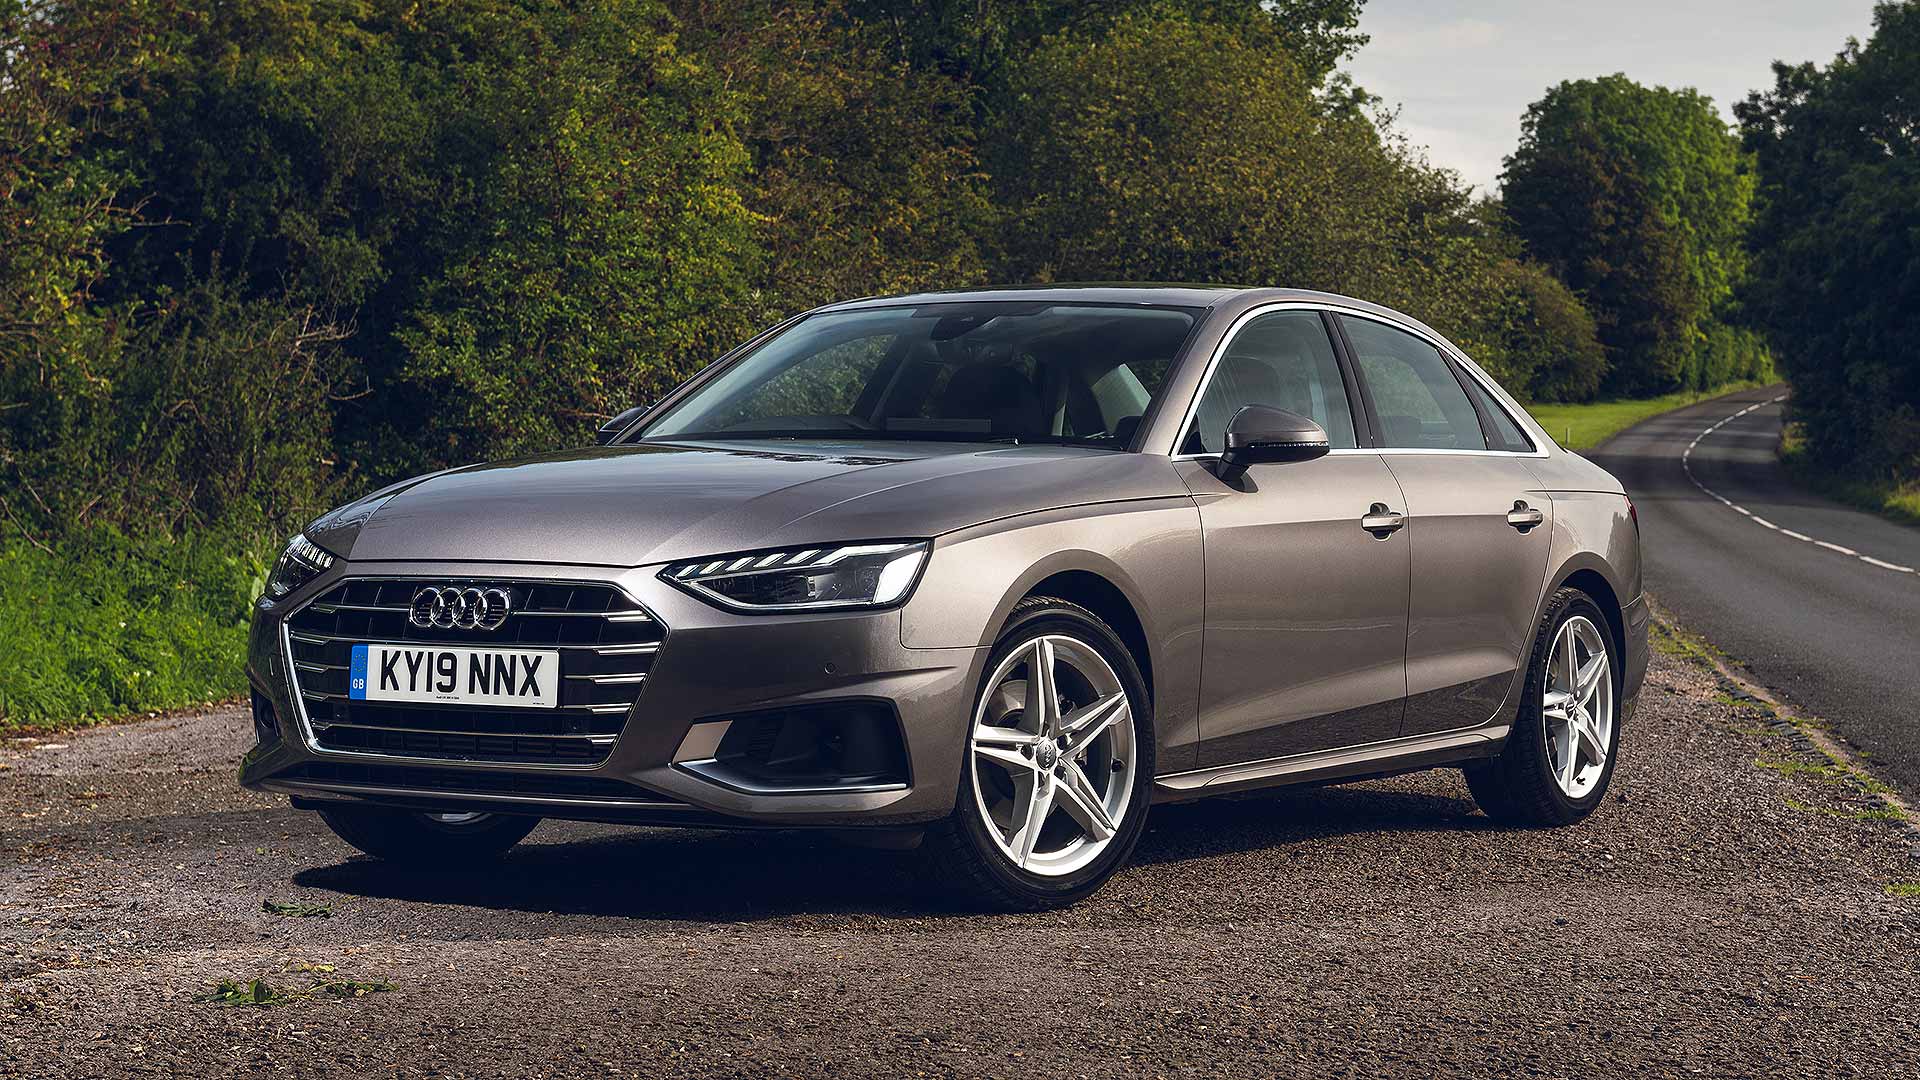 Audi A4 35 TFSI Sport S tronic 2019 review Motoring Research